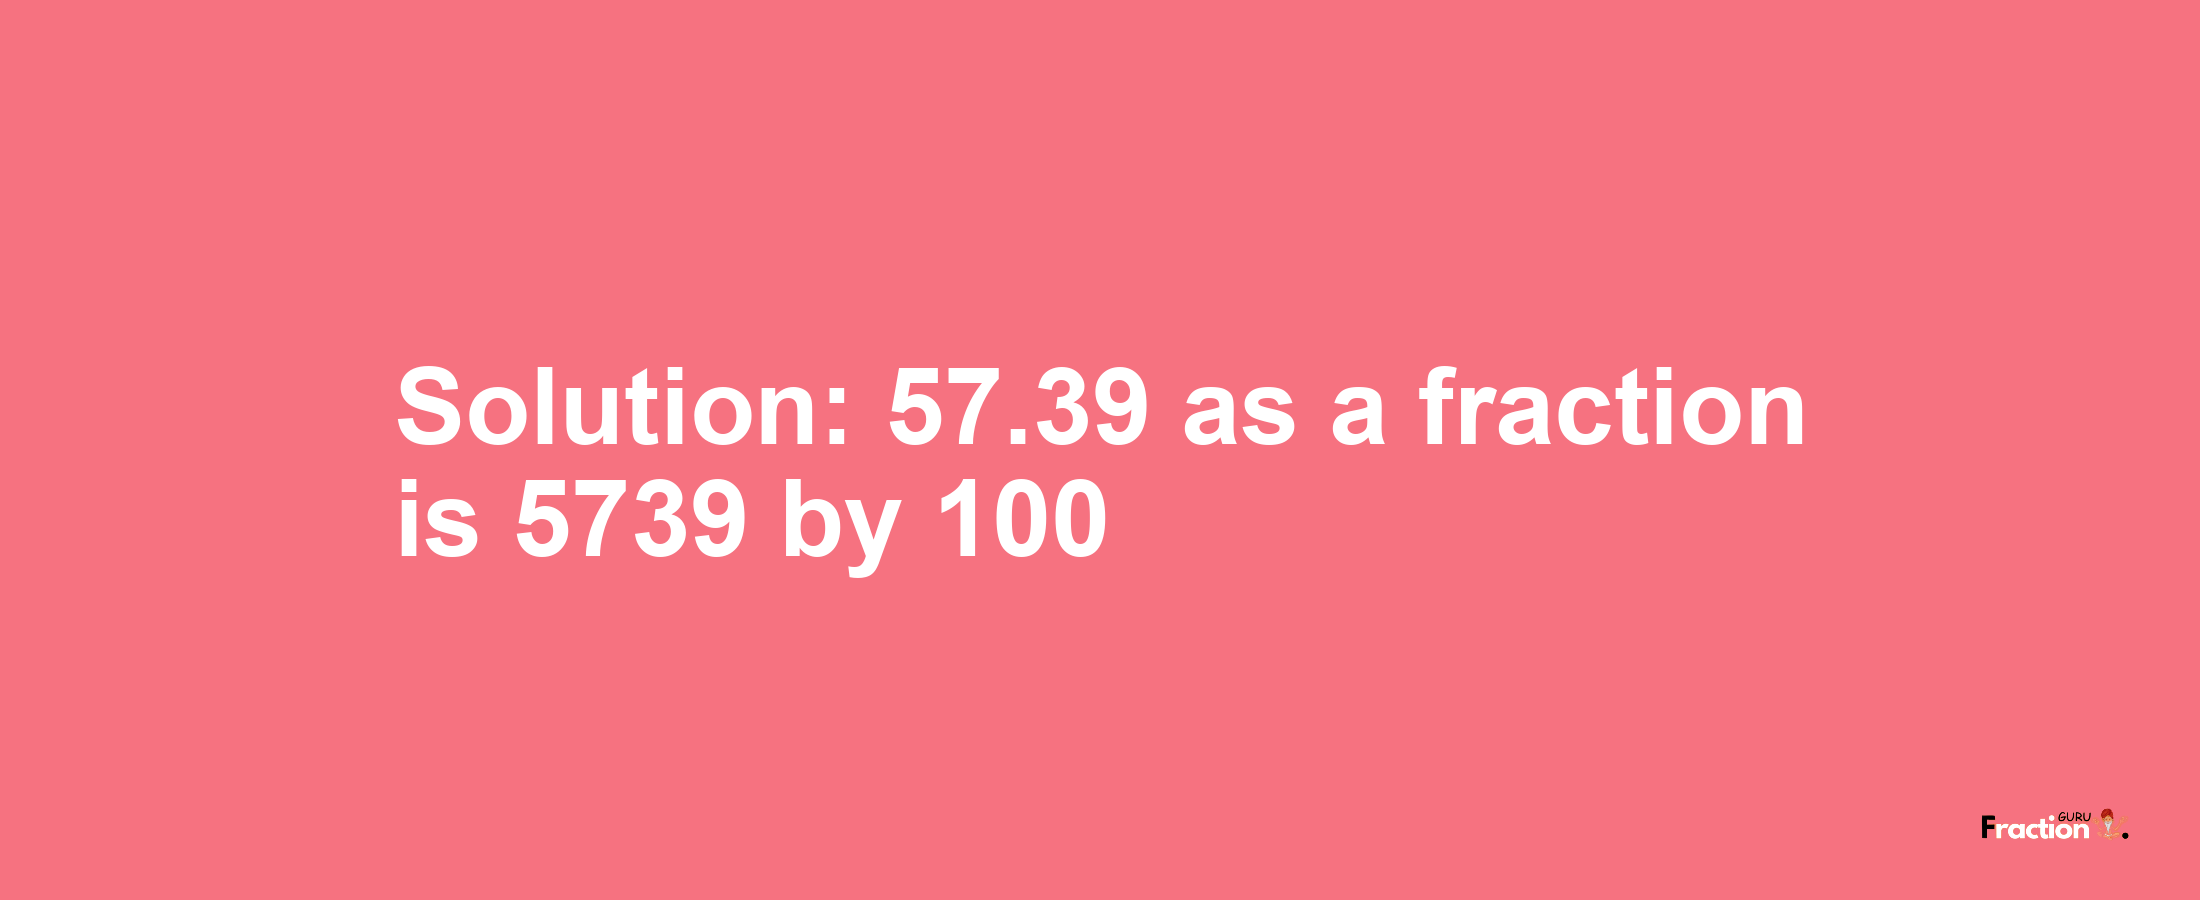 Solution:57.39 as a fraction is 5739/100